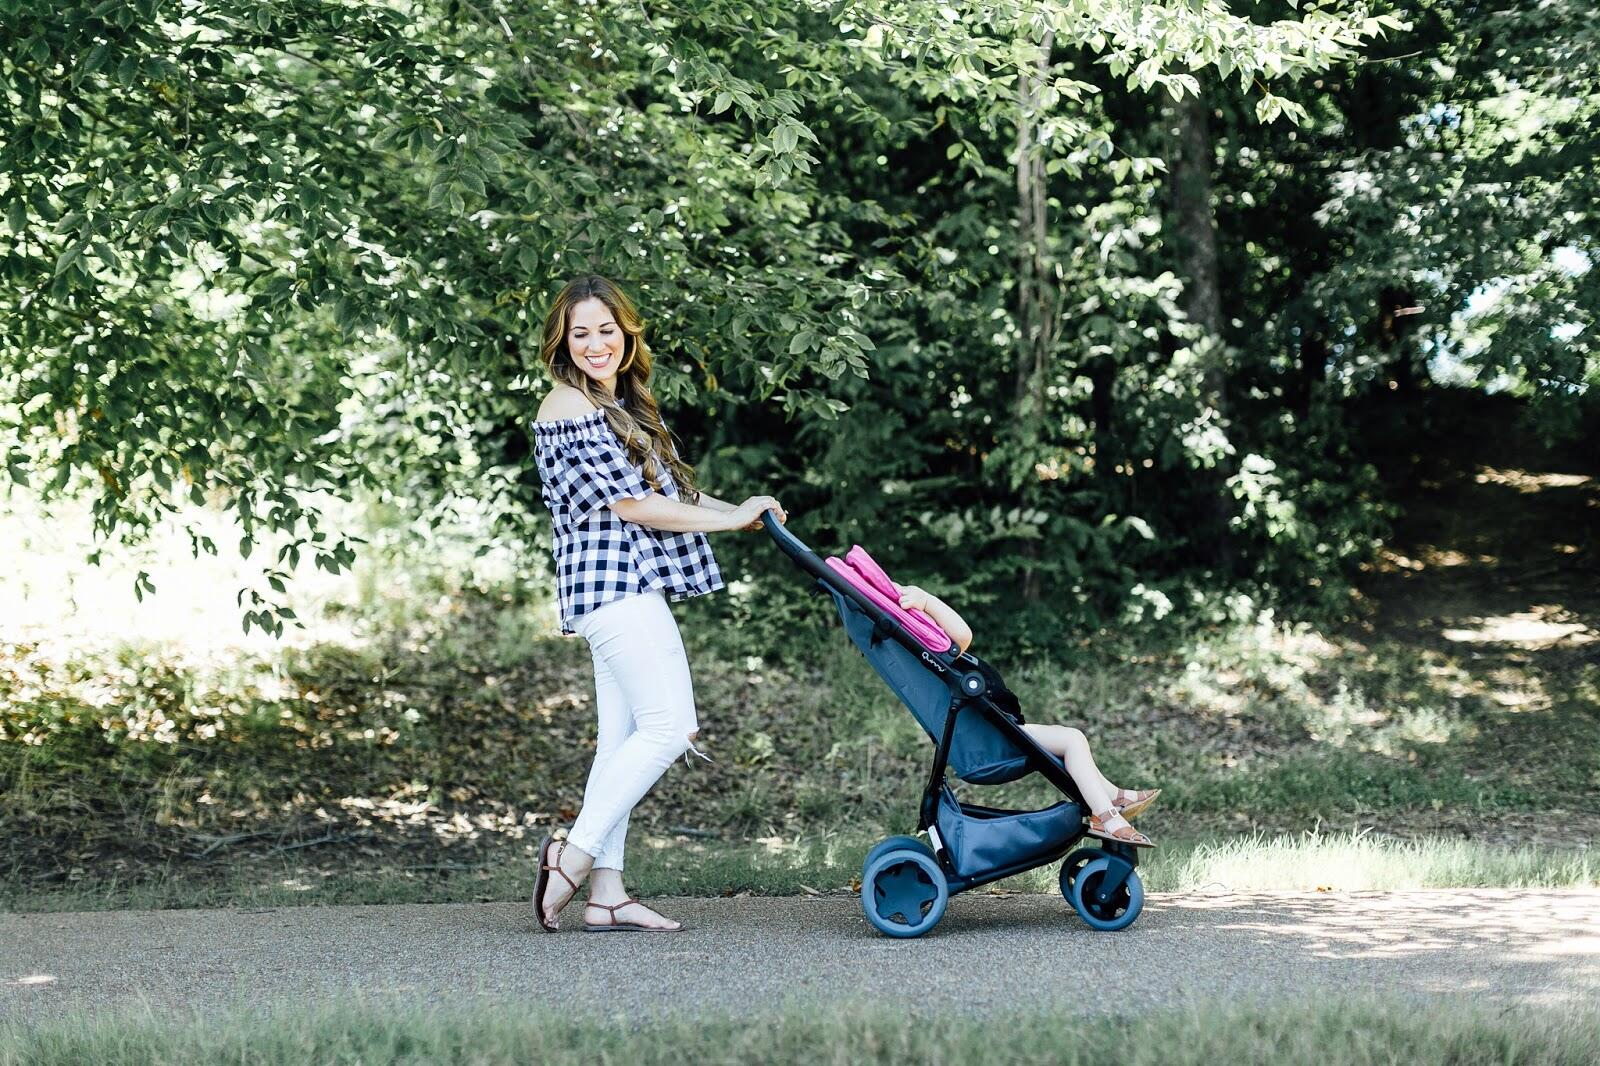 5 How to Keep your Toddler Entertained in their Stroller: 5 Activities featured by top Memphis lifestyle blogger, Walking in Memphis in High Heels. For Toddlers on Stroller Walks by popular lifestyle blogger Laura of Walking in Memphis in High Heels